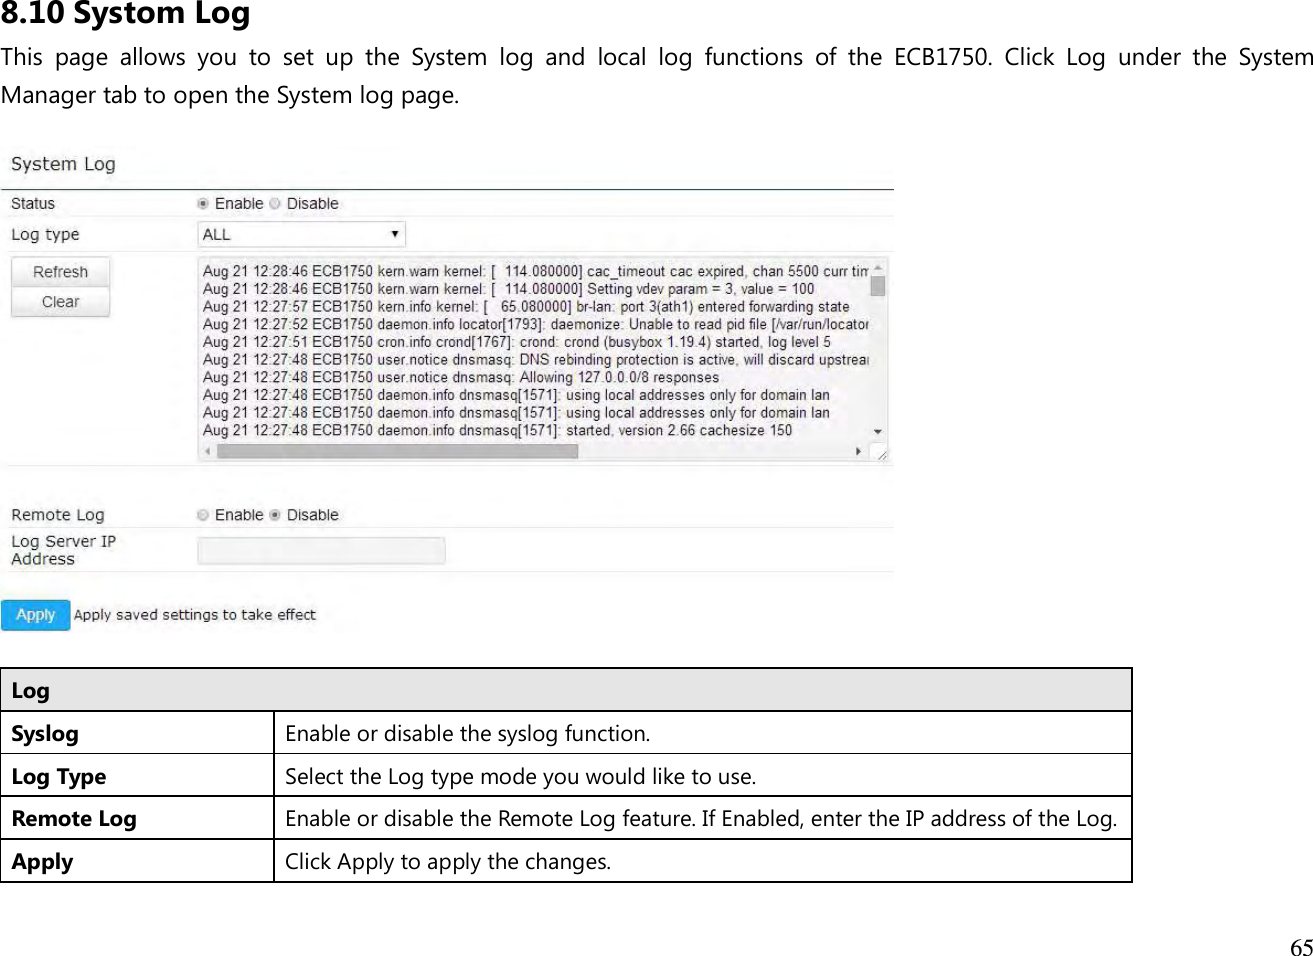  65  8.10 Systom Log This  page  allows  you  to  set  up  the  System  log  and  local  log  functions  of  the  ECB1750.  Click  Log  under  the  System Manager tab to open the System log page.    Log Syslog  Enable or disable the syslog function. Log Type Select the Log type mode you would like to use. Remote Log  Enable or disable the Remote Log feature. If Enabled, enter the IP address of the Log. Apply Click Apply to apply the changes.  